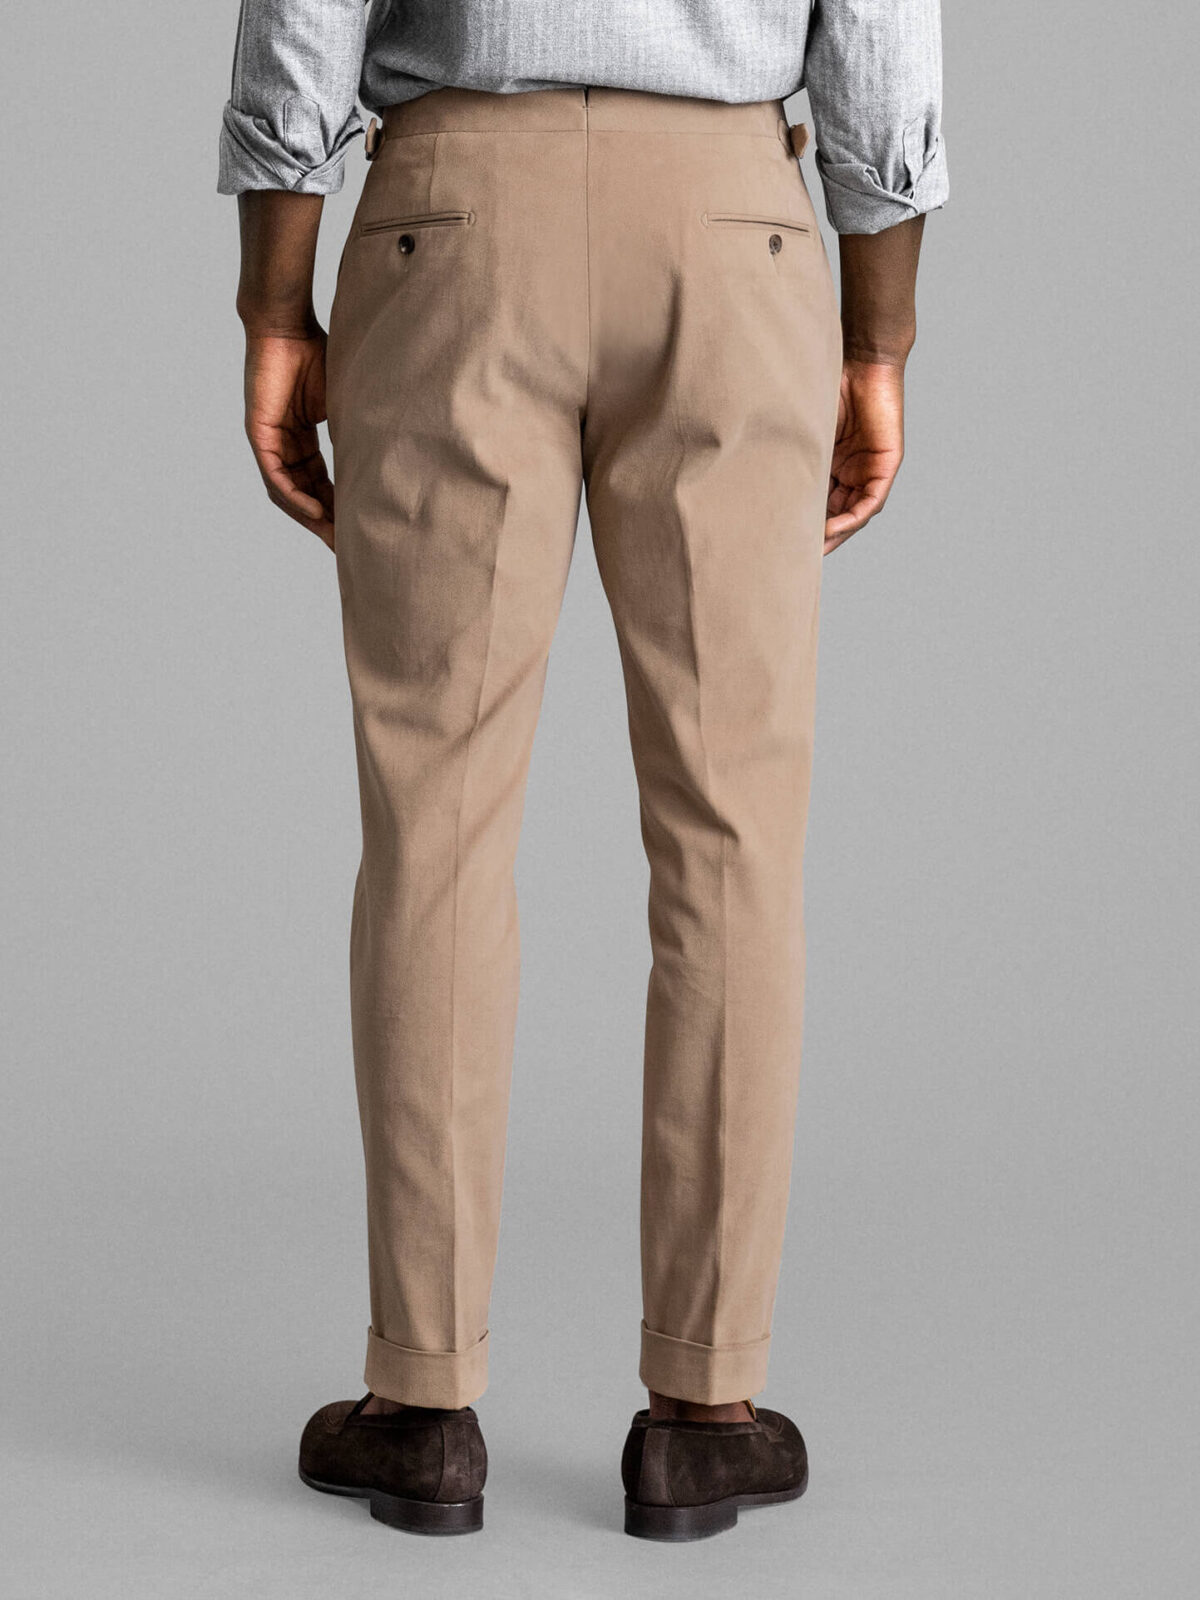 Beige Heavy Brushed Cotton Stretch Dress Pant - Custom Fit Tailored Clothing